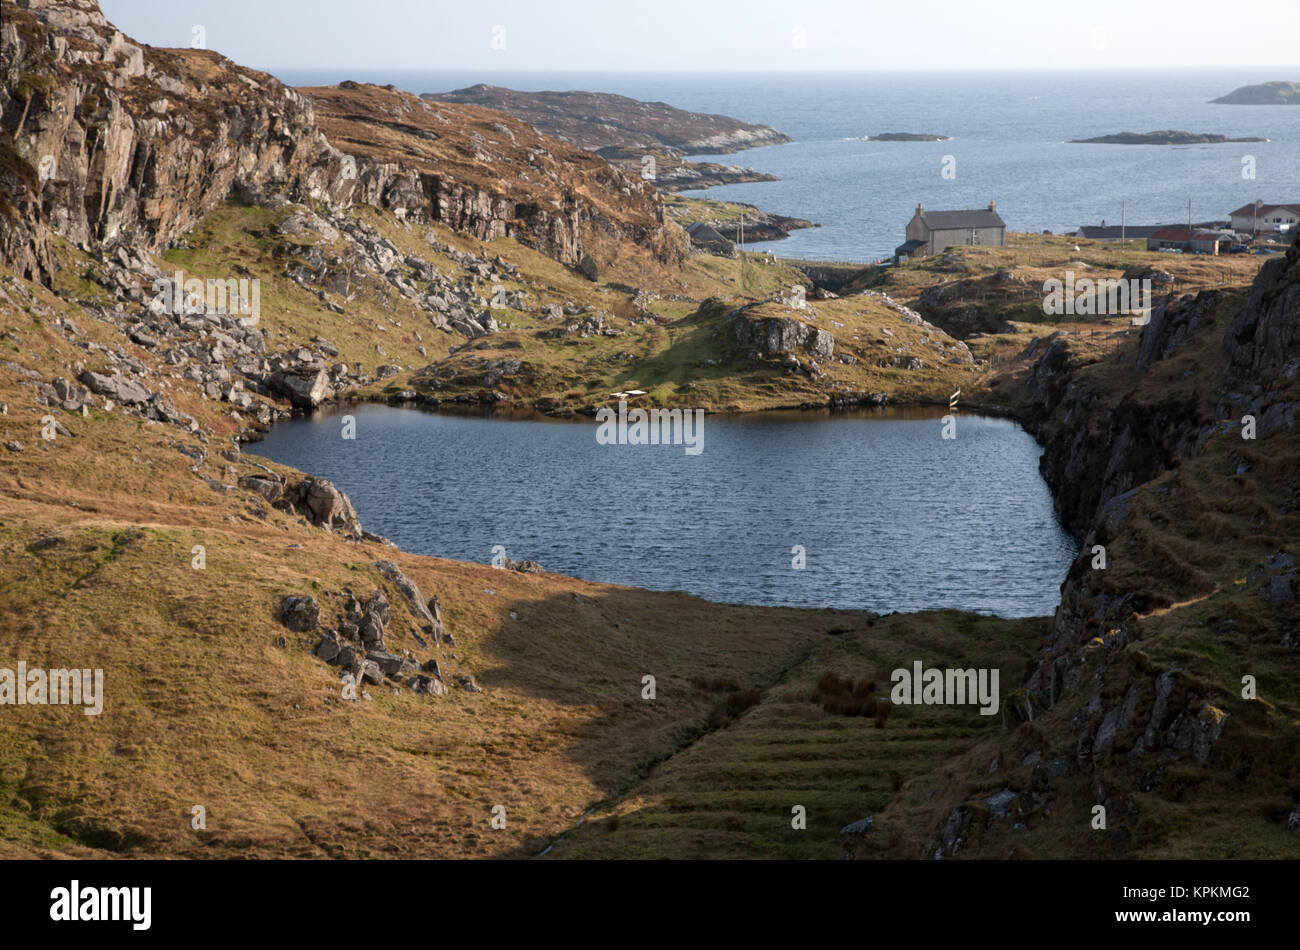 Loch Leacach and the former fishing community of Geocrab, Isle of Harris, Western Isles. Stock Photo